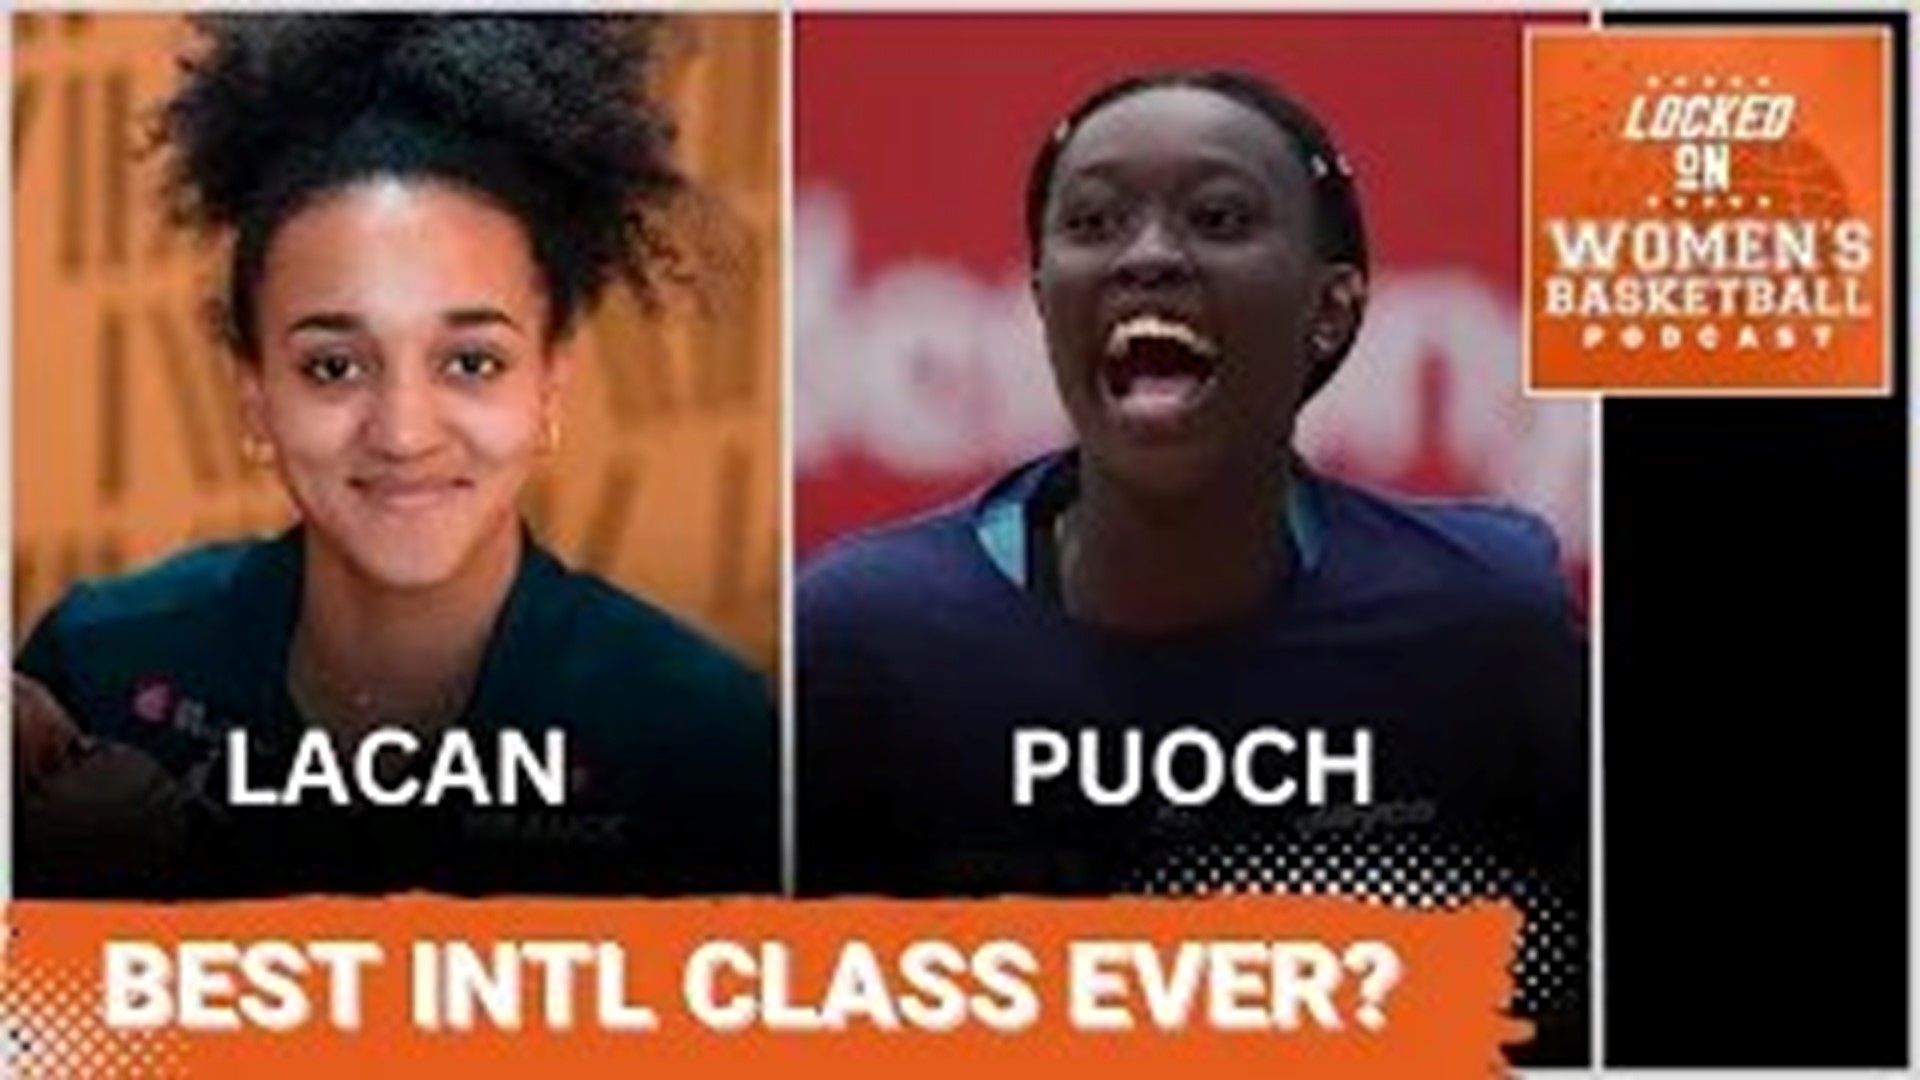 Host Hunter Cruse is joined by co-hosts Em Adler and Lincoln Shafer to preview the top international prospects in this year's WNBA draft, including Leïla Lacan.